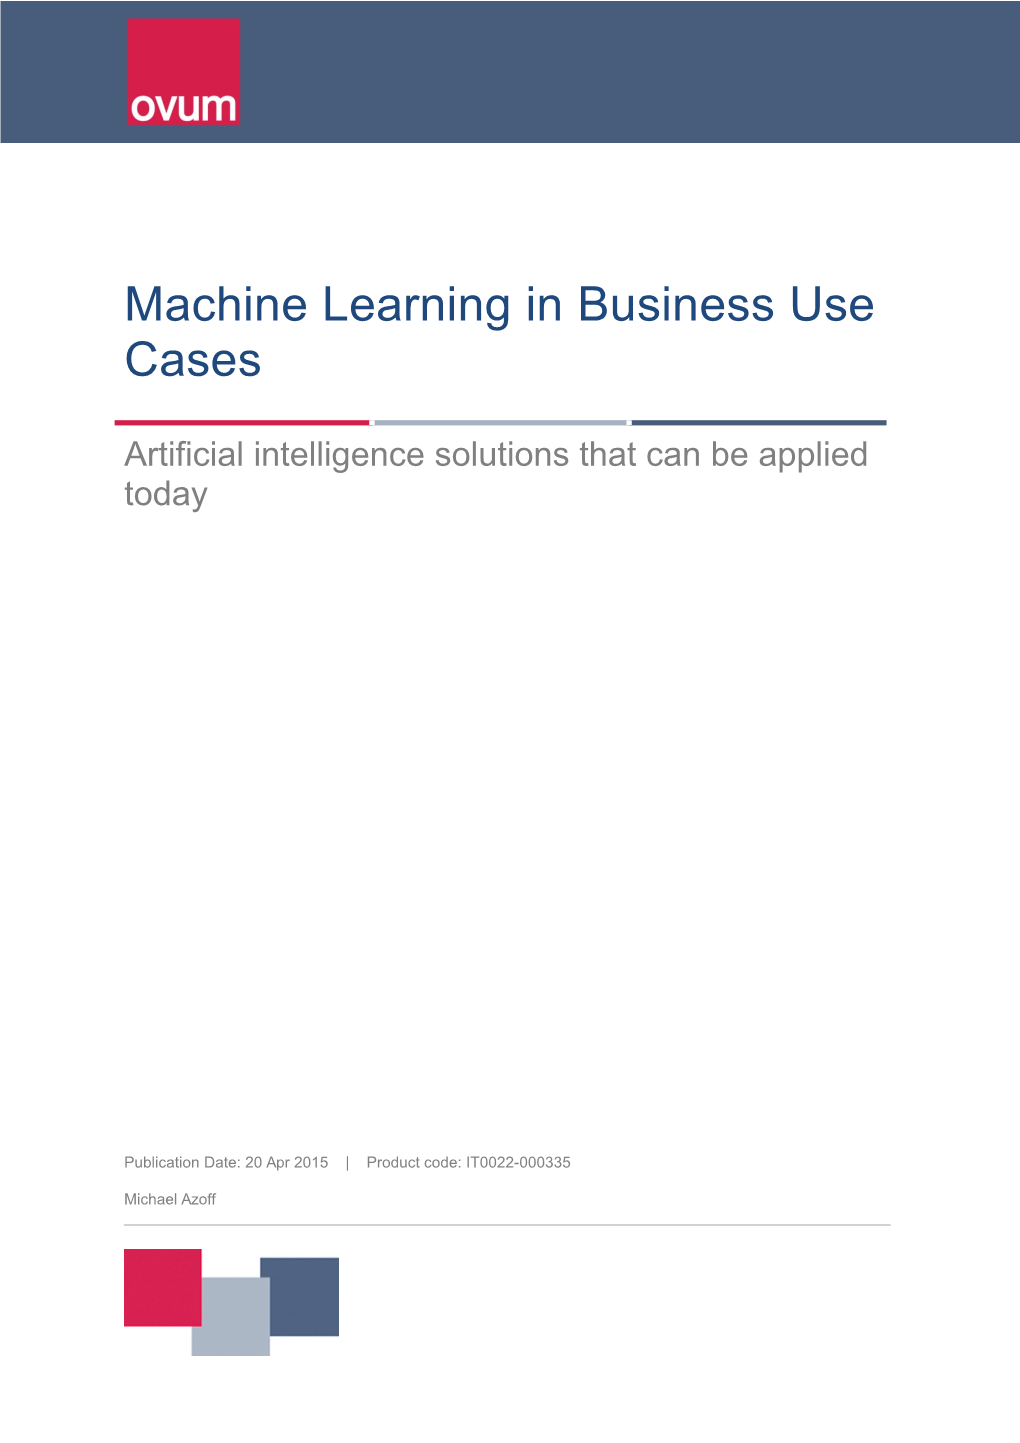 Machine Learning in Business Use Cases